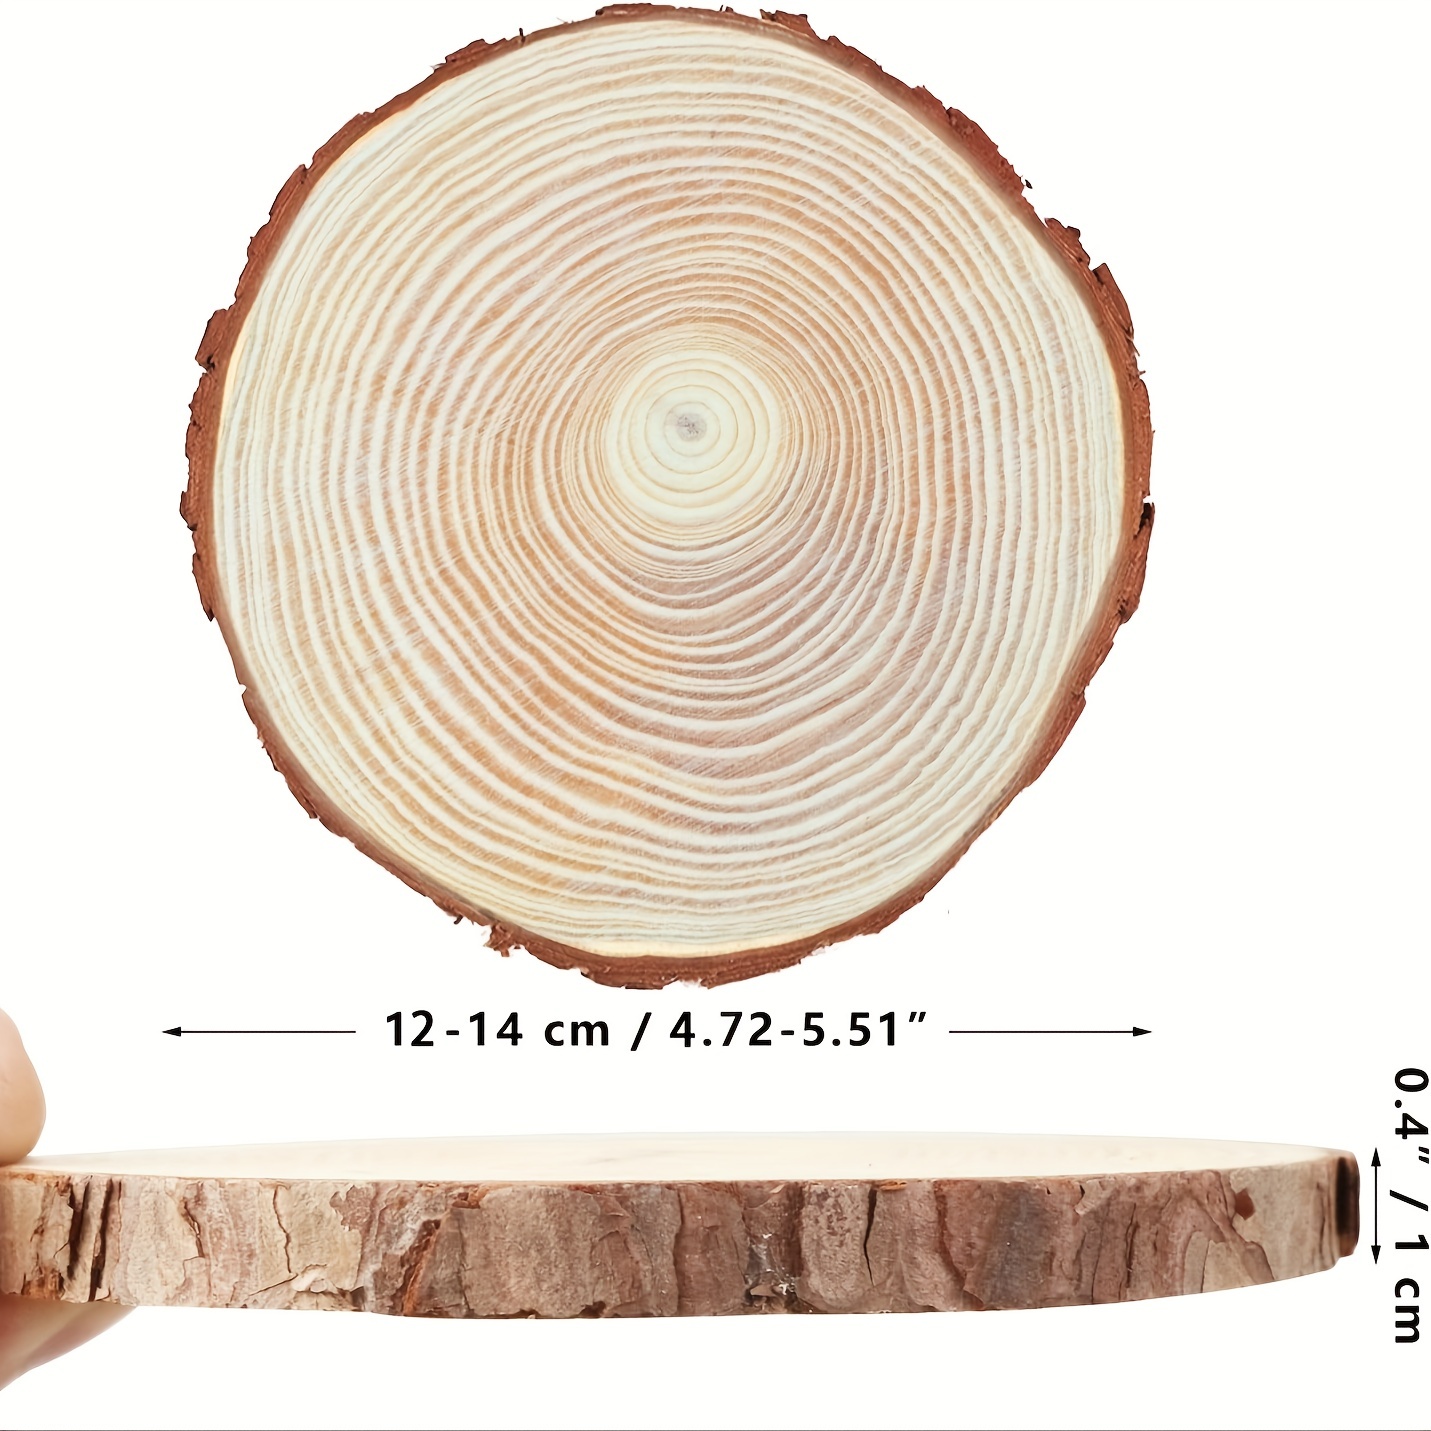 Fuyit Wood Slices 8 Pcs 5.1-5.5 inches Unfinished Natural Tree Slice Wooden  Circle with Bark Log Discs for DIY Arts and Craft Christmas Ornaments